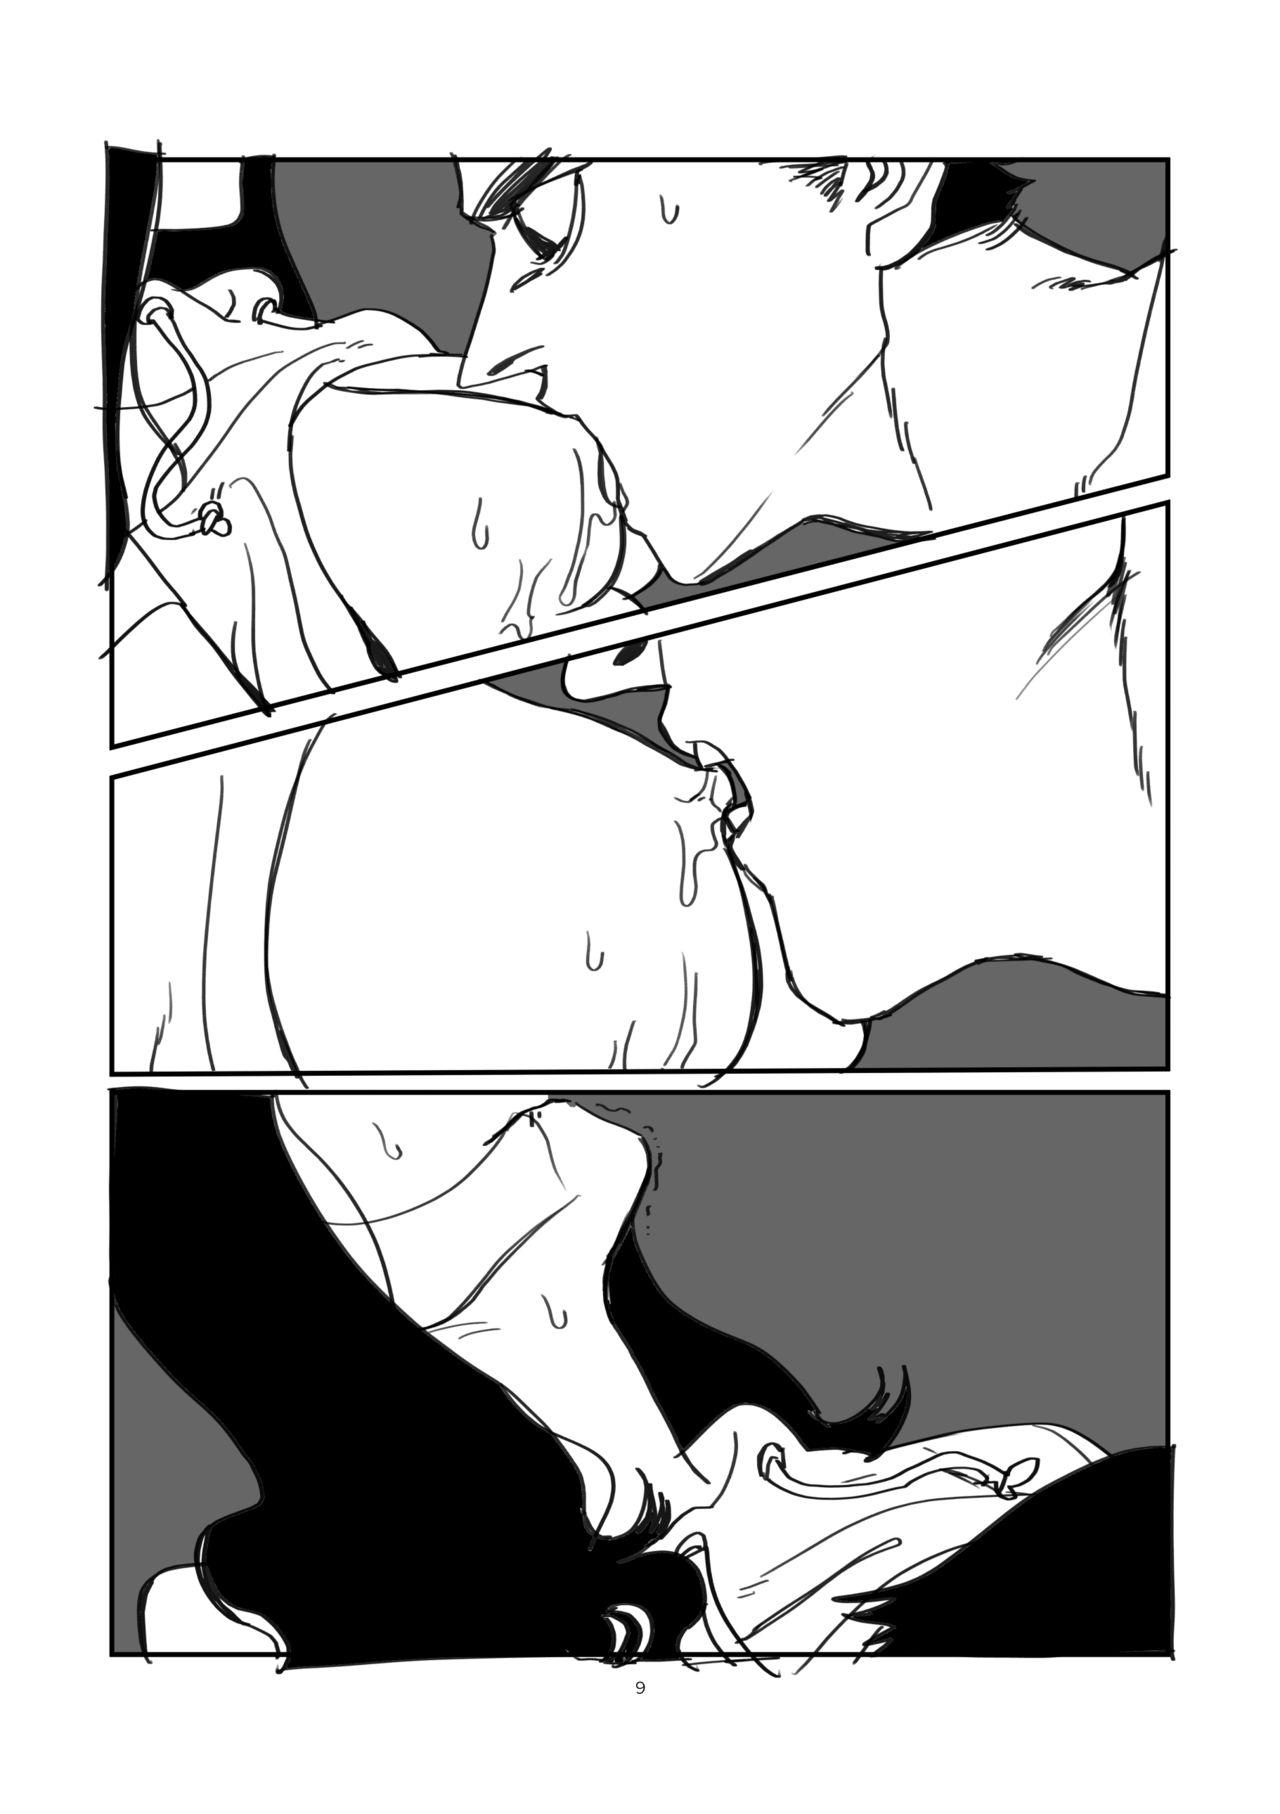 Best Blow Job Ever 무제 Small Tits - Page 9